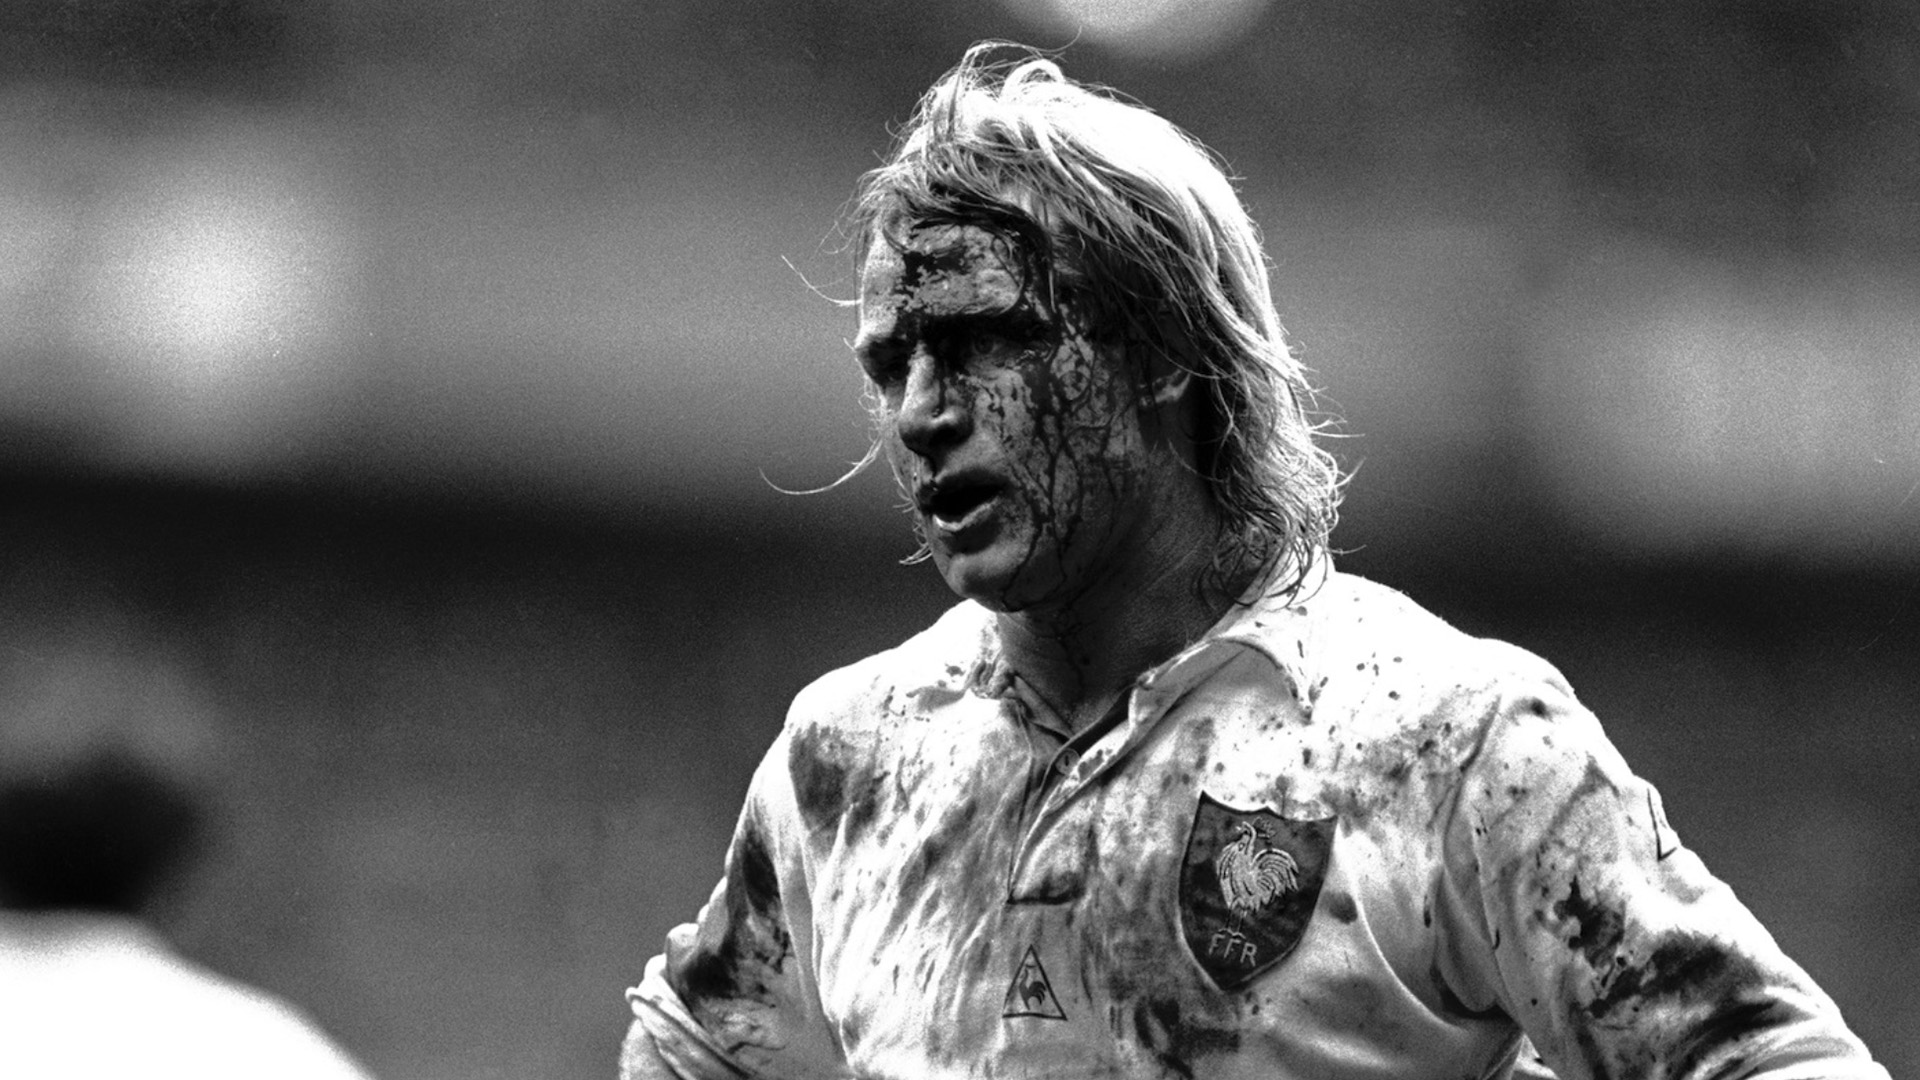 Photographing Rugby: Eyeing the Mud